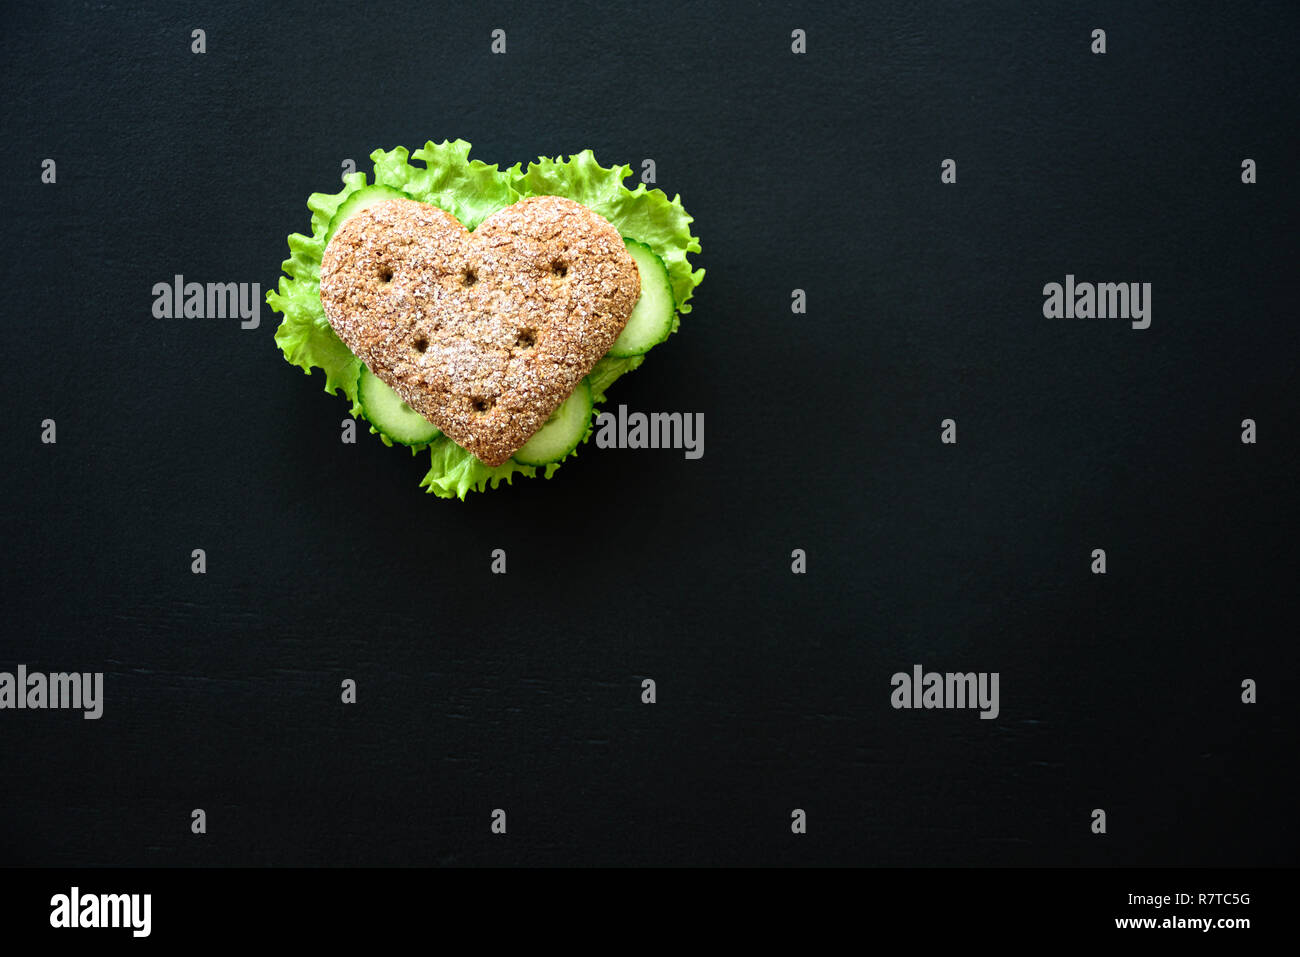 Healthy heart shape sandwich with salad and cucumbers. Dieting concept. Blackboard background Stock Photo